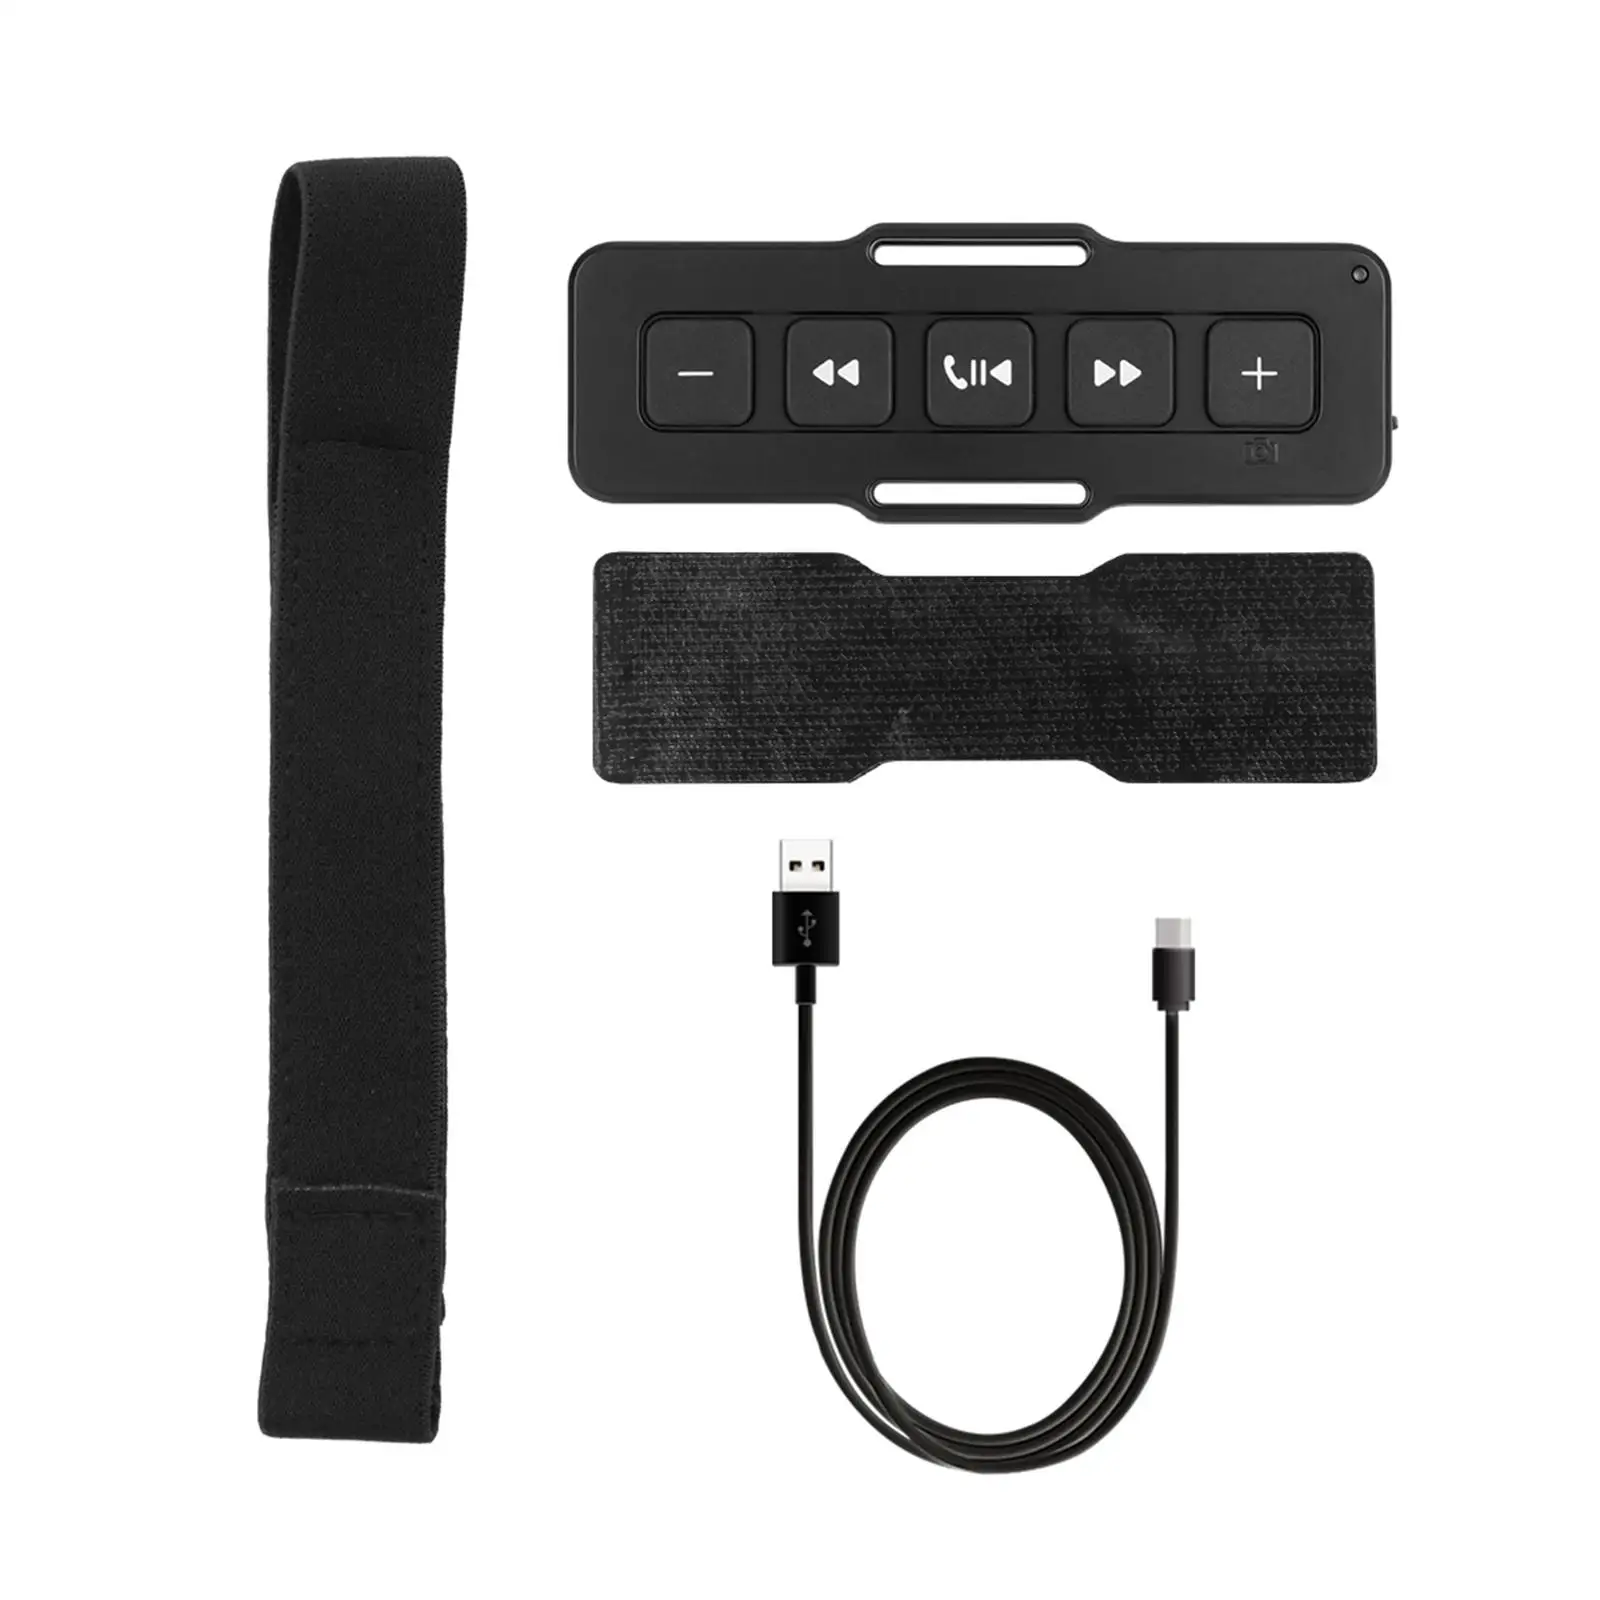 with Elastic Band Car Remote Controller 5 Button Waterproof Durable Rechargeable Wireless Compact Media Control for Running